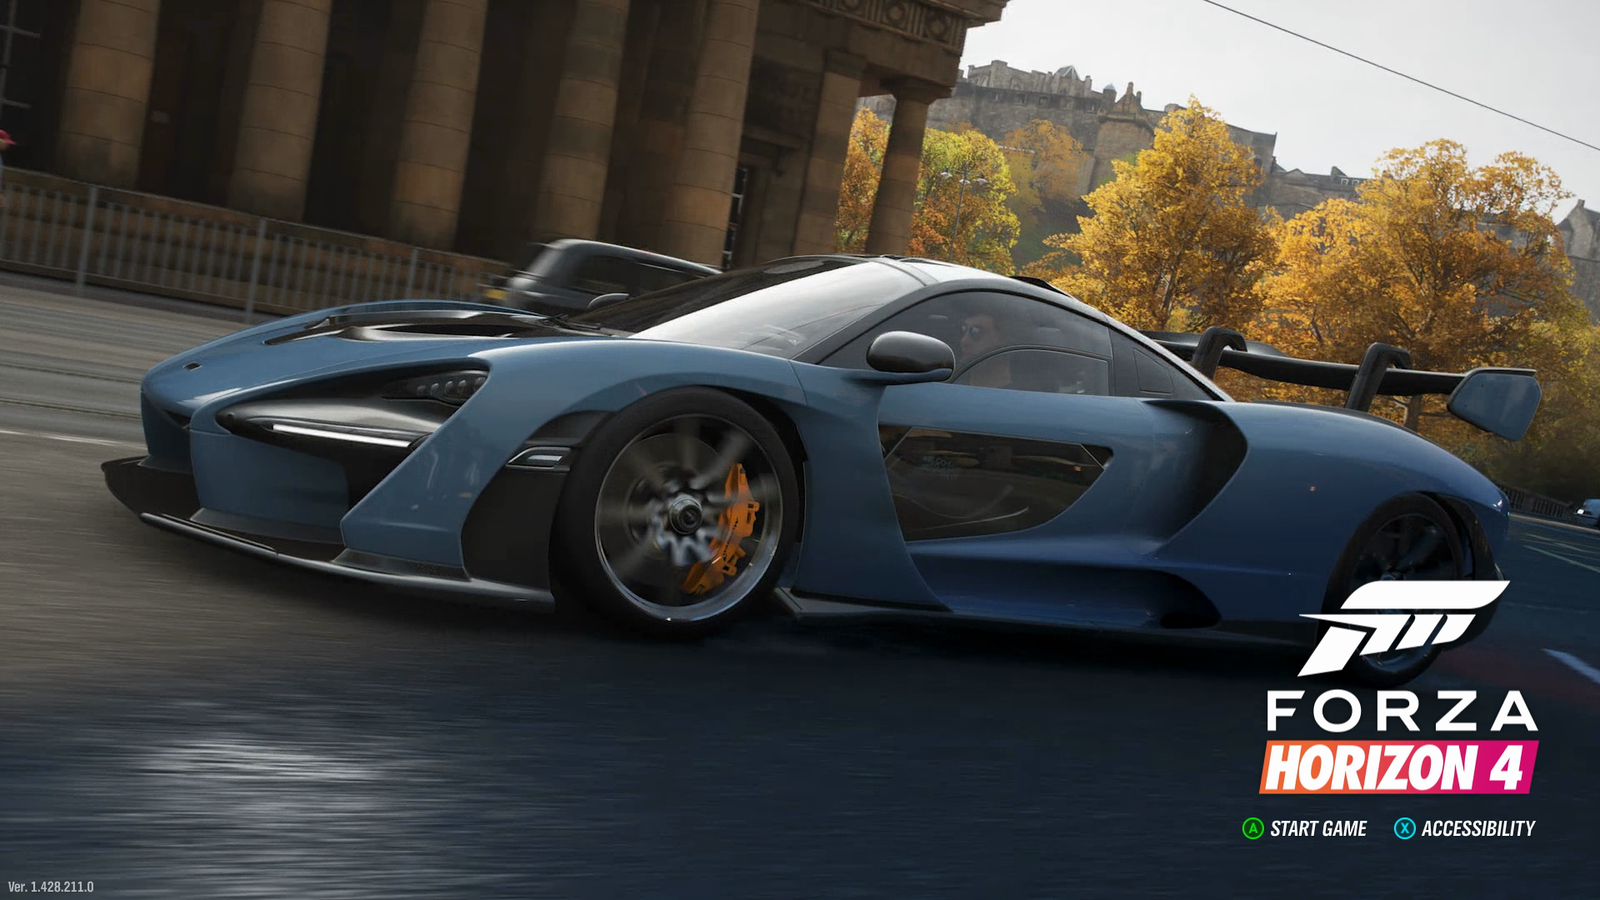 Screenshot of the Forza Horizon 4 landing screen. There are two navigation prompts: "Press A to start game," and "Press X for Accessibility."